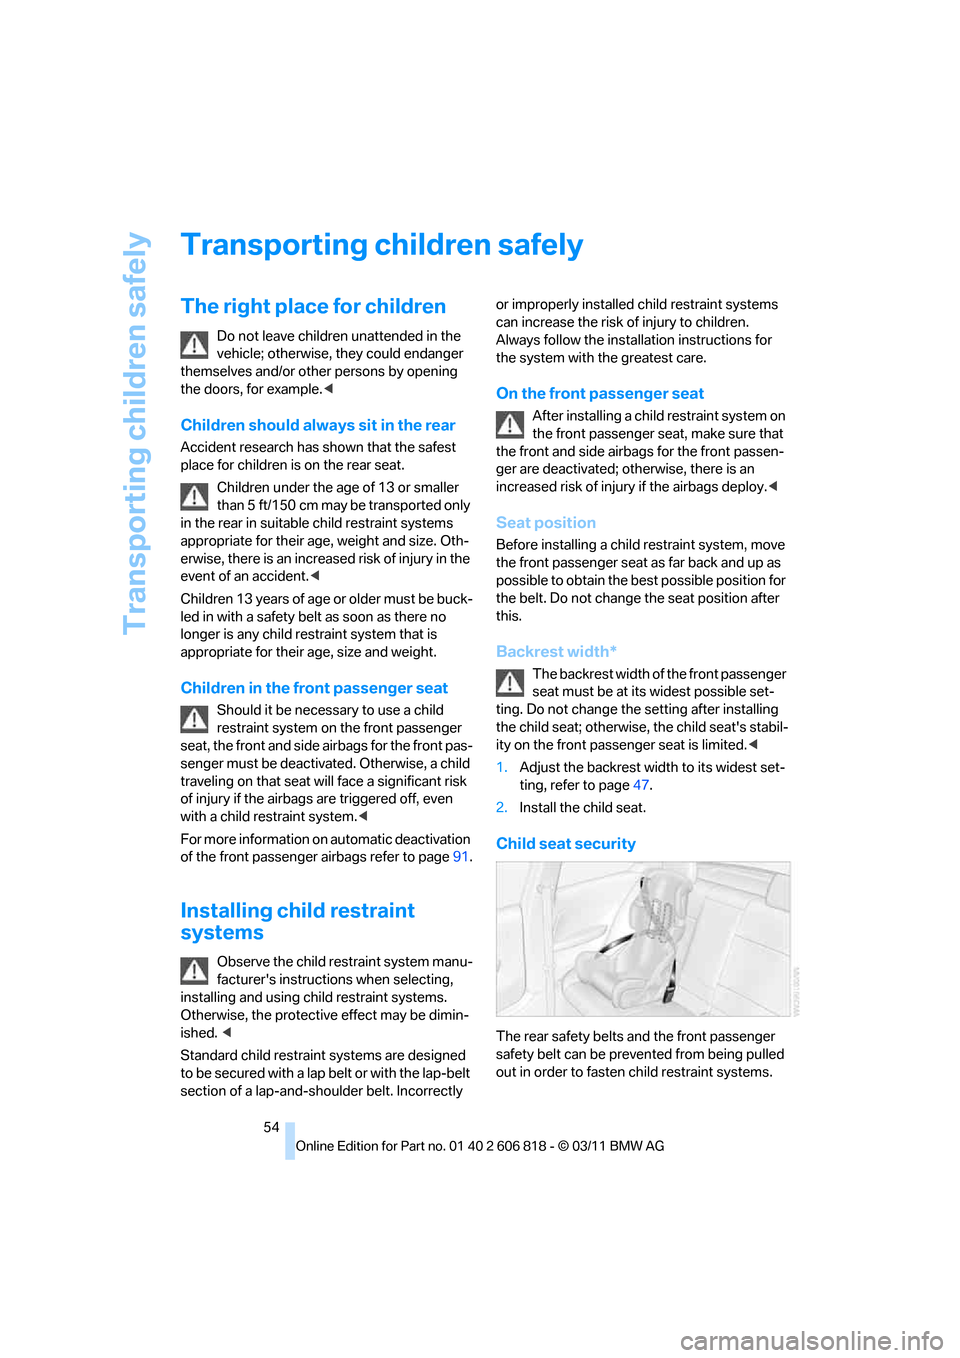 BMW 128I 2012 E88 Owners Manual Transporting children safely
54
Transporting children safely
The right place for children
Do not leave children unattended in the 
vehicle; otherwise, they could endanger 
themselves and/or other pers